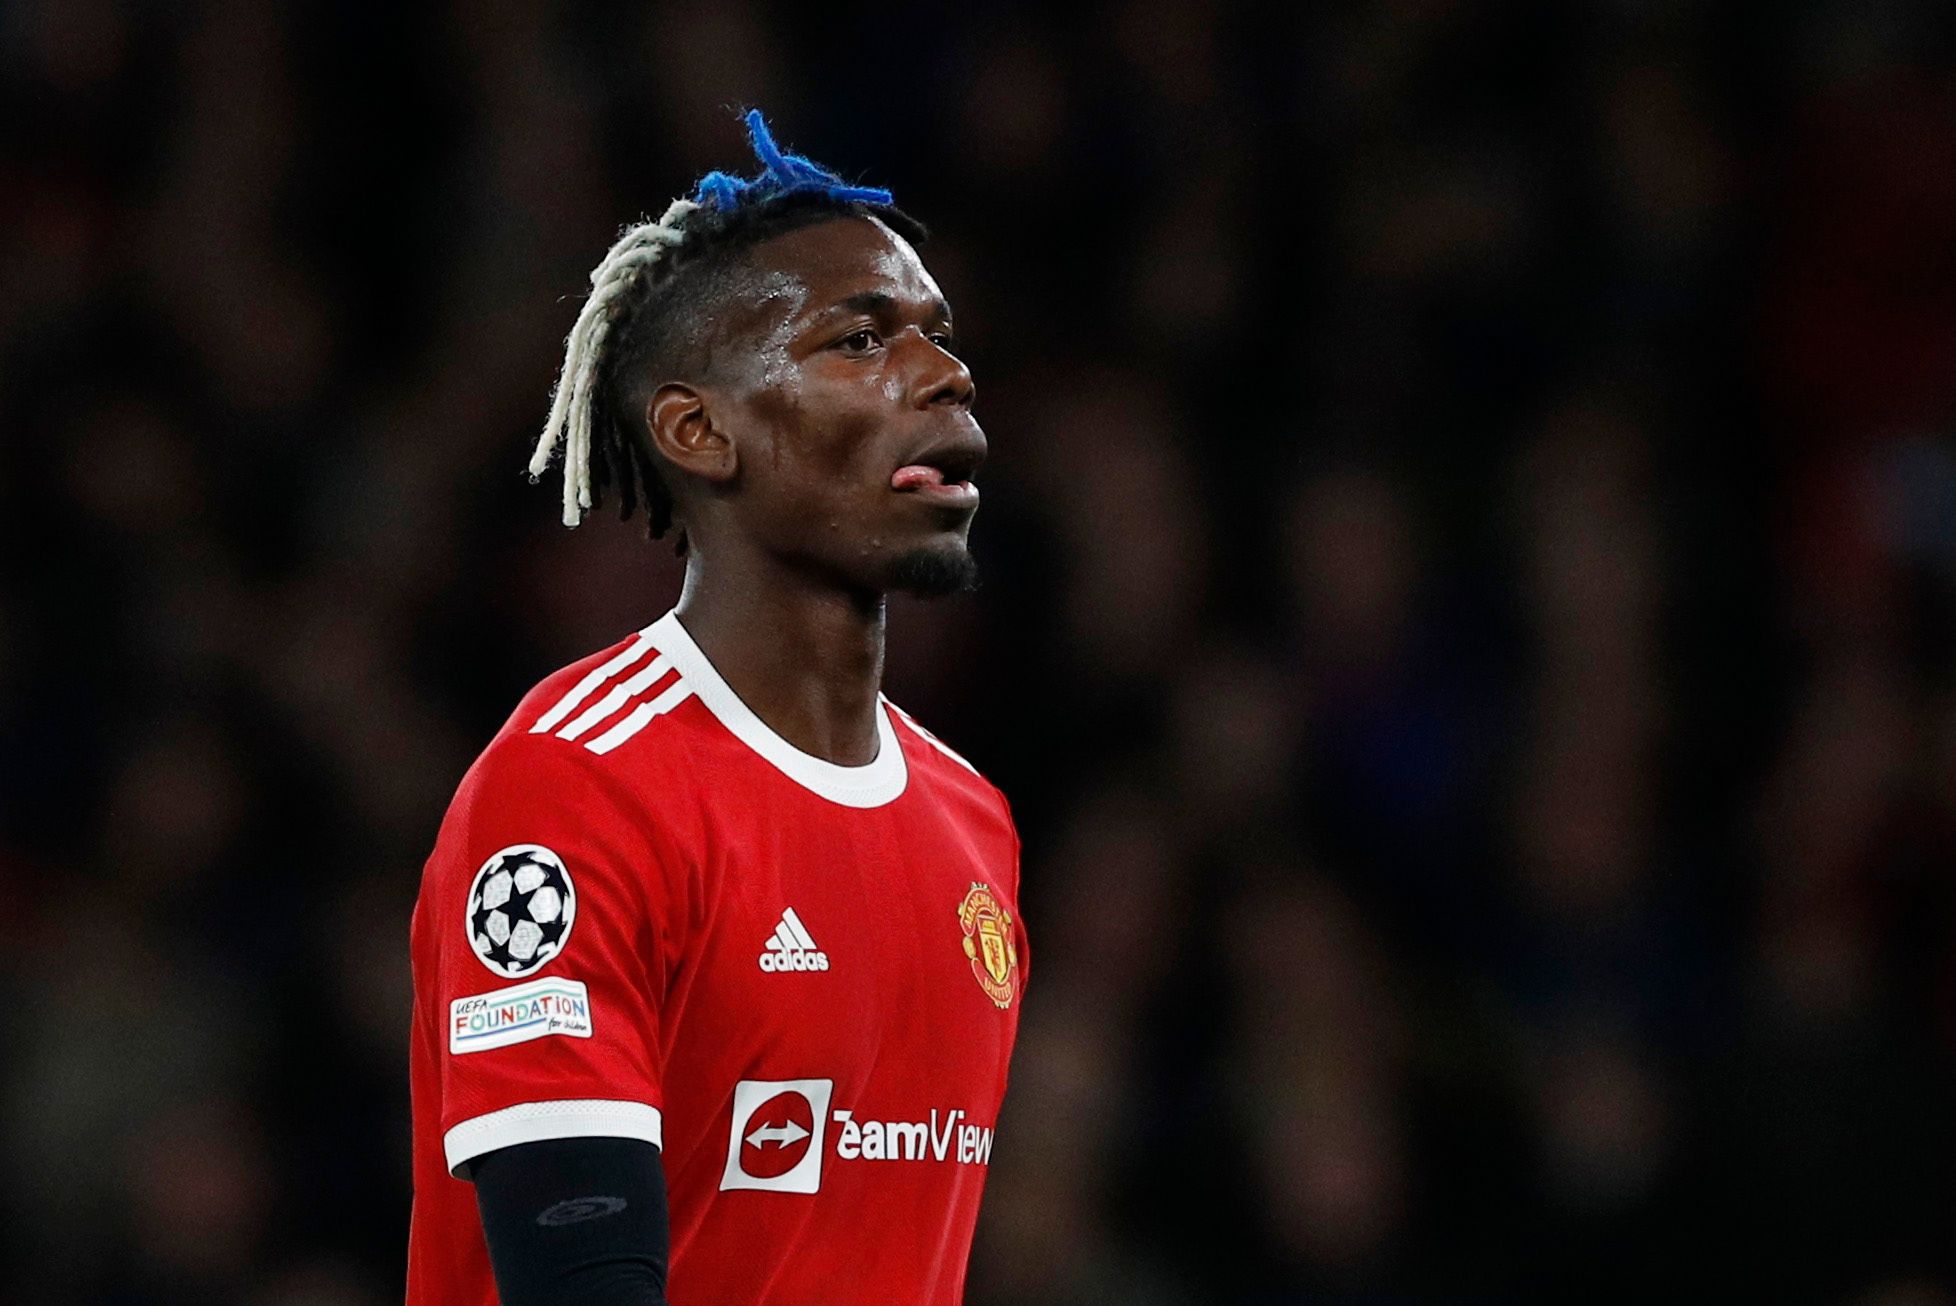 Soccer Football - Champions League - Group F - Manchester United v Villarreal - Old Trafford, Manchester, Britain - September 29, 2021 Manchester United's Paul Pogba during the match REUTERS/Phil Noble